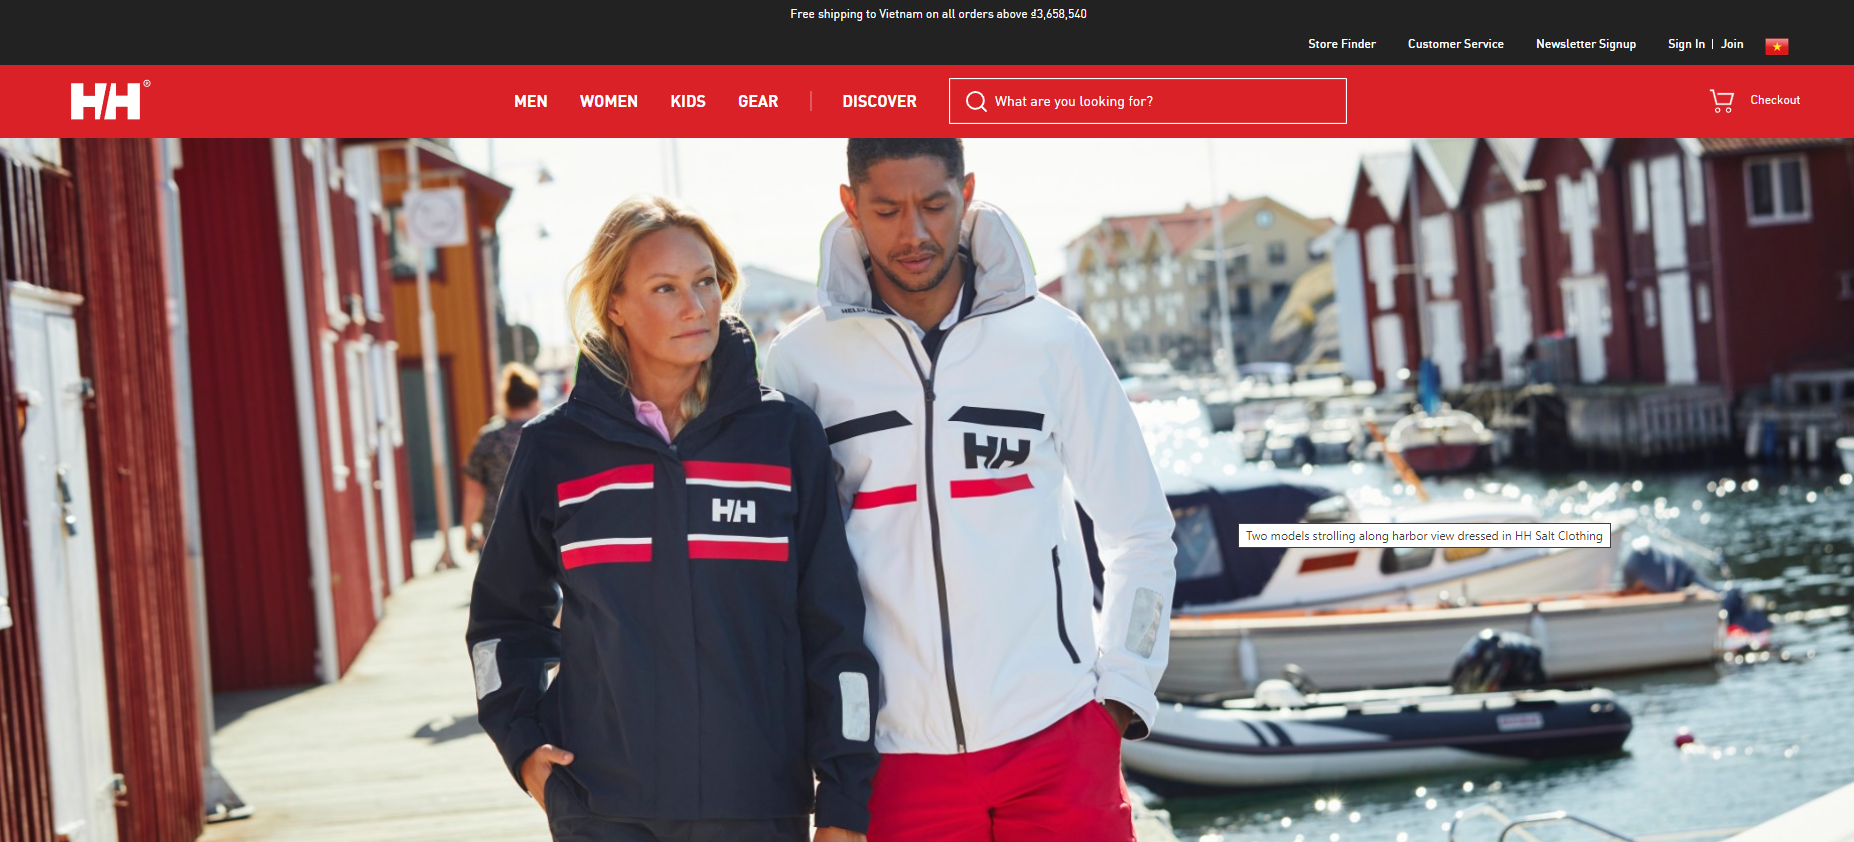 Helly Hensen has bult its website using the powerful Magento 2 platform